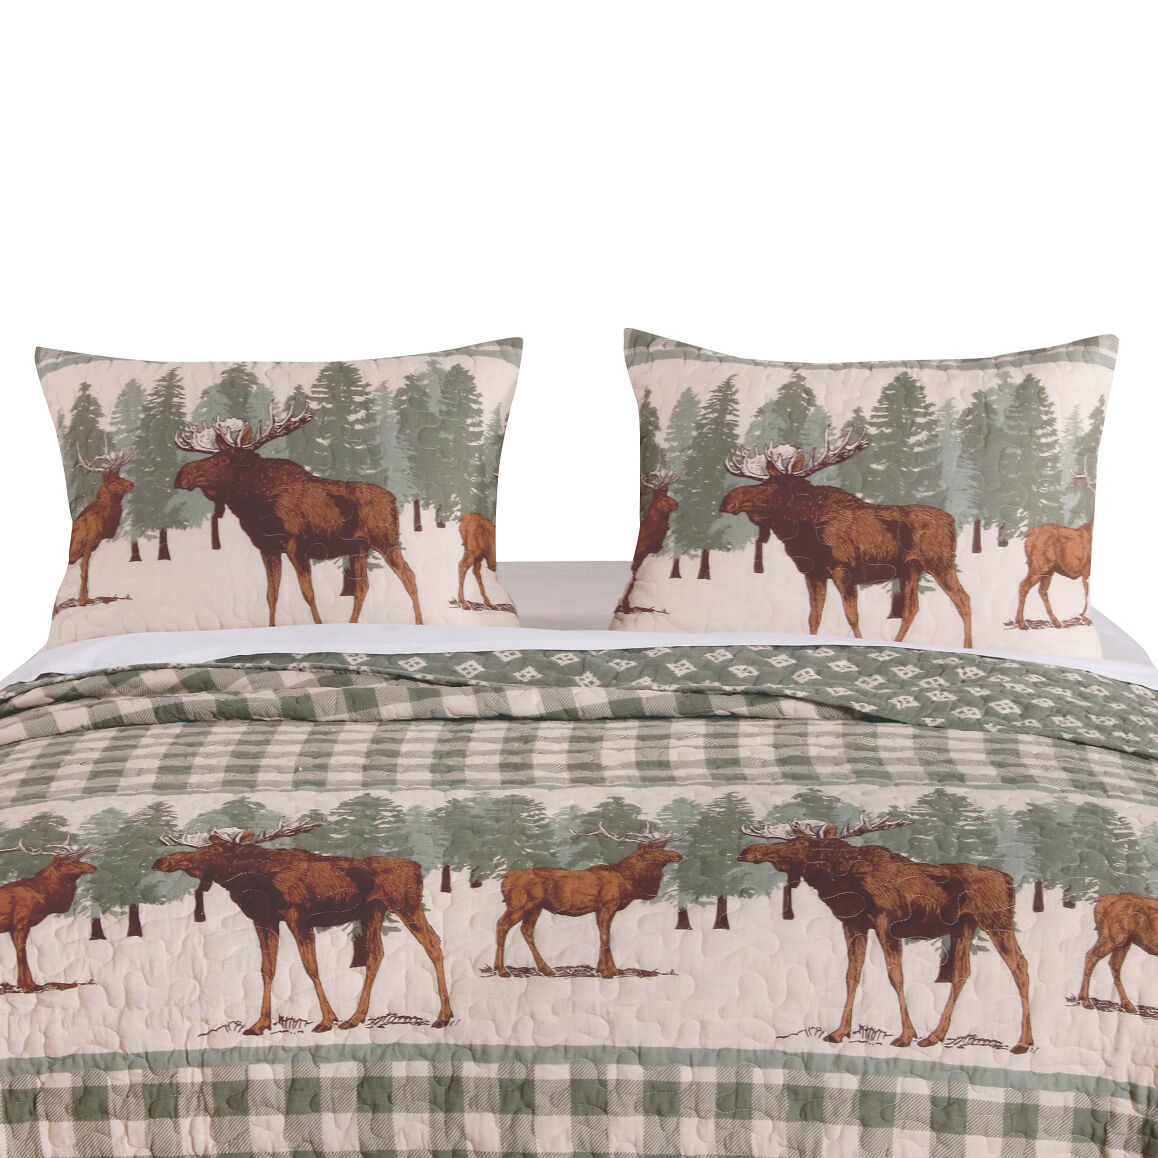 36 x 20 Fabric King Pillow Sham with Animal and Tree Print, Green and Brown - BM223380